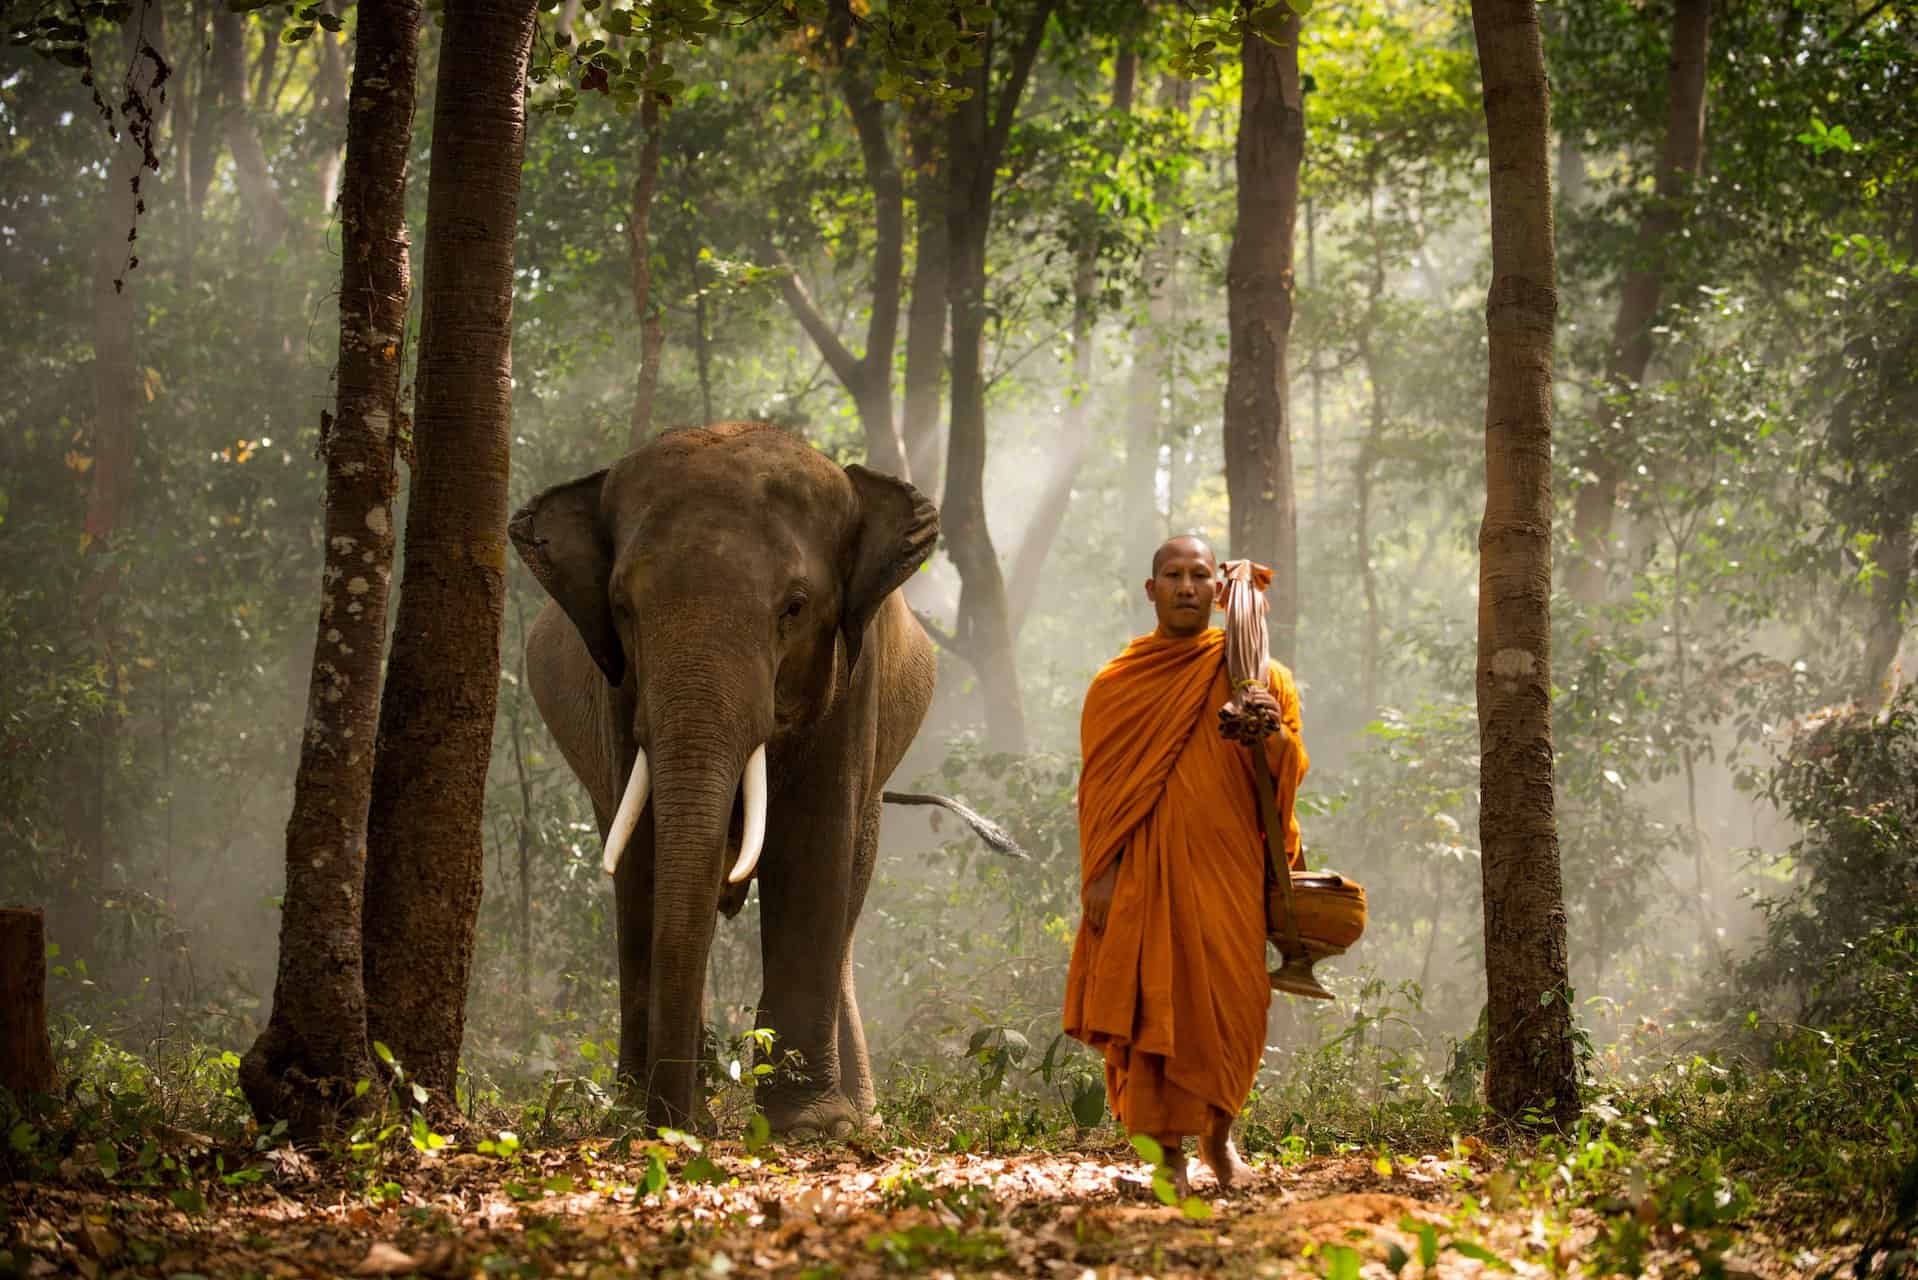 Elephant and buddist monch in Thailand